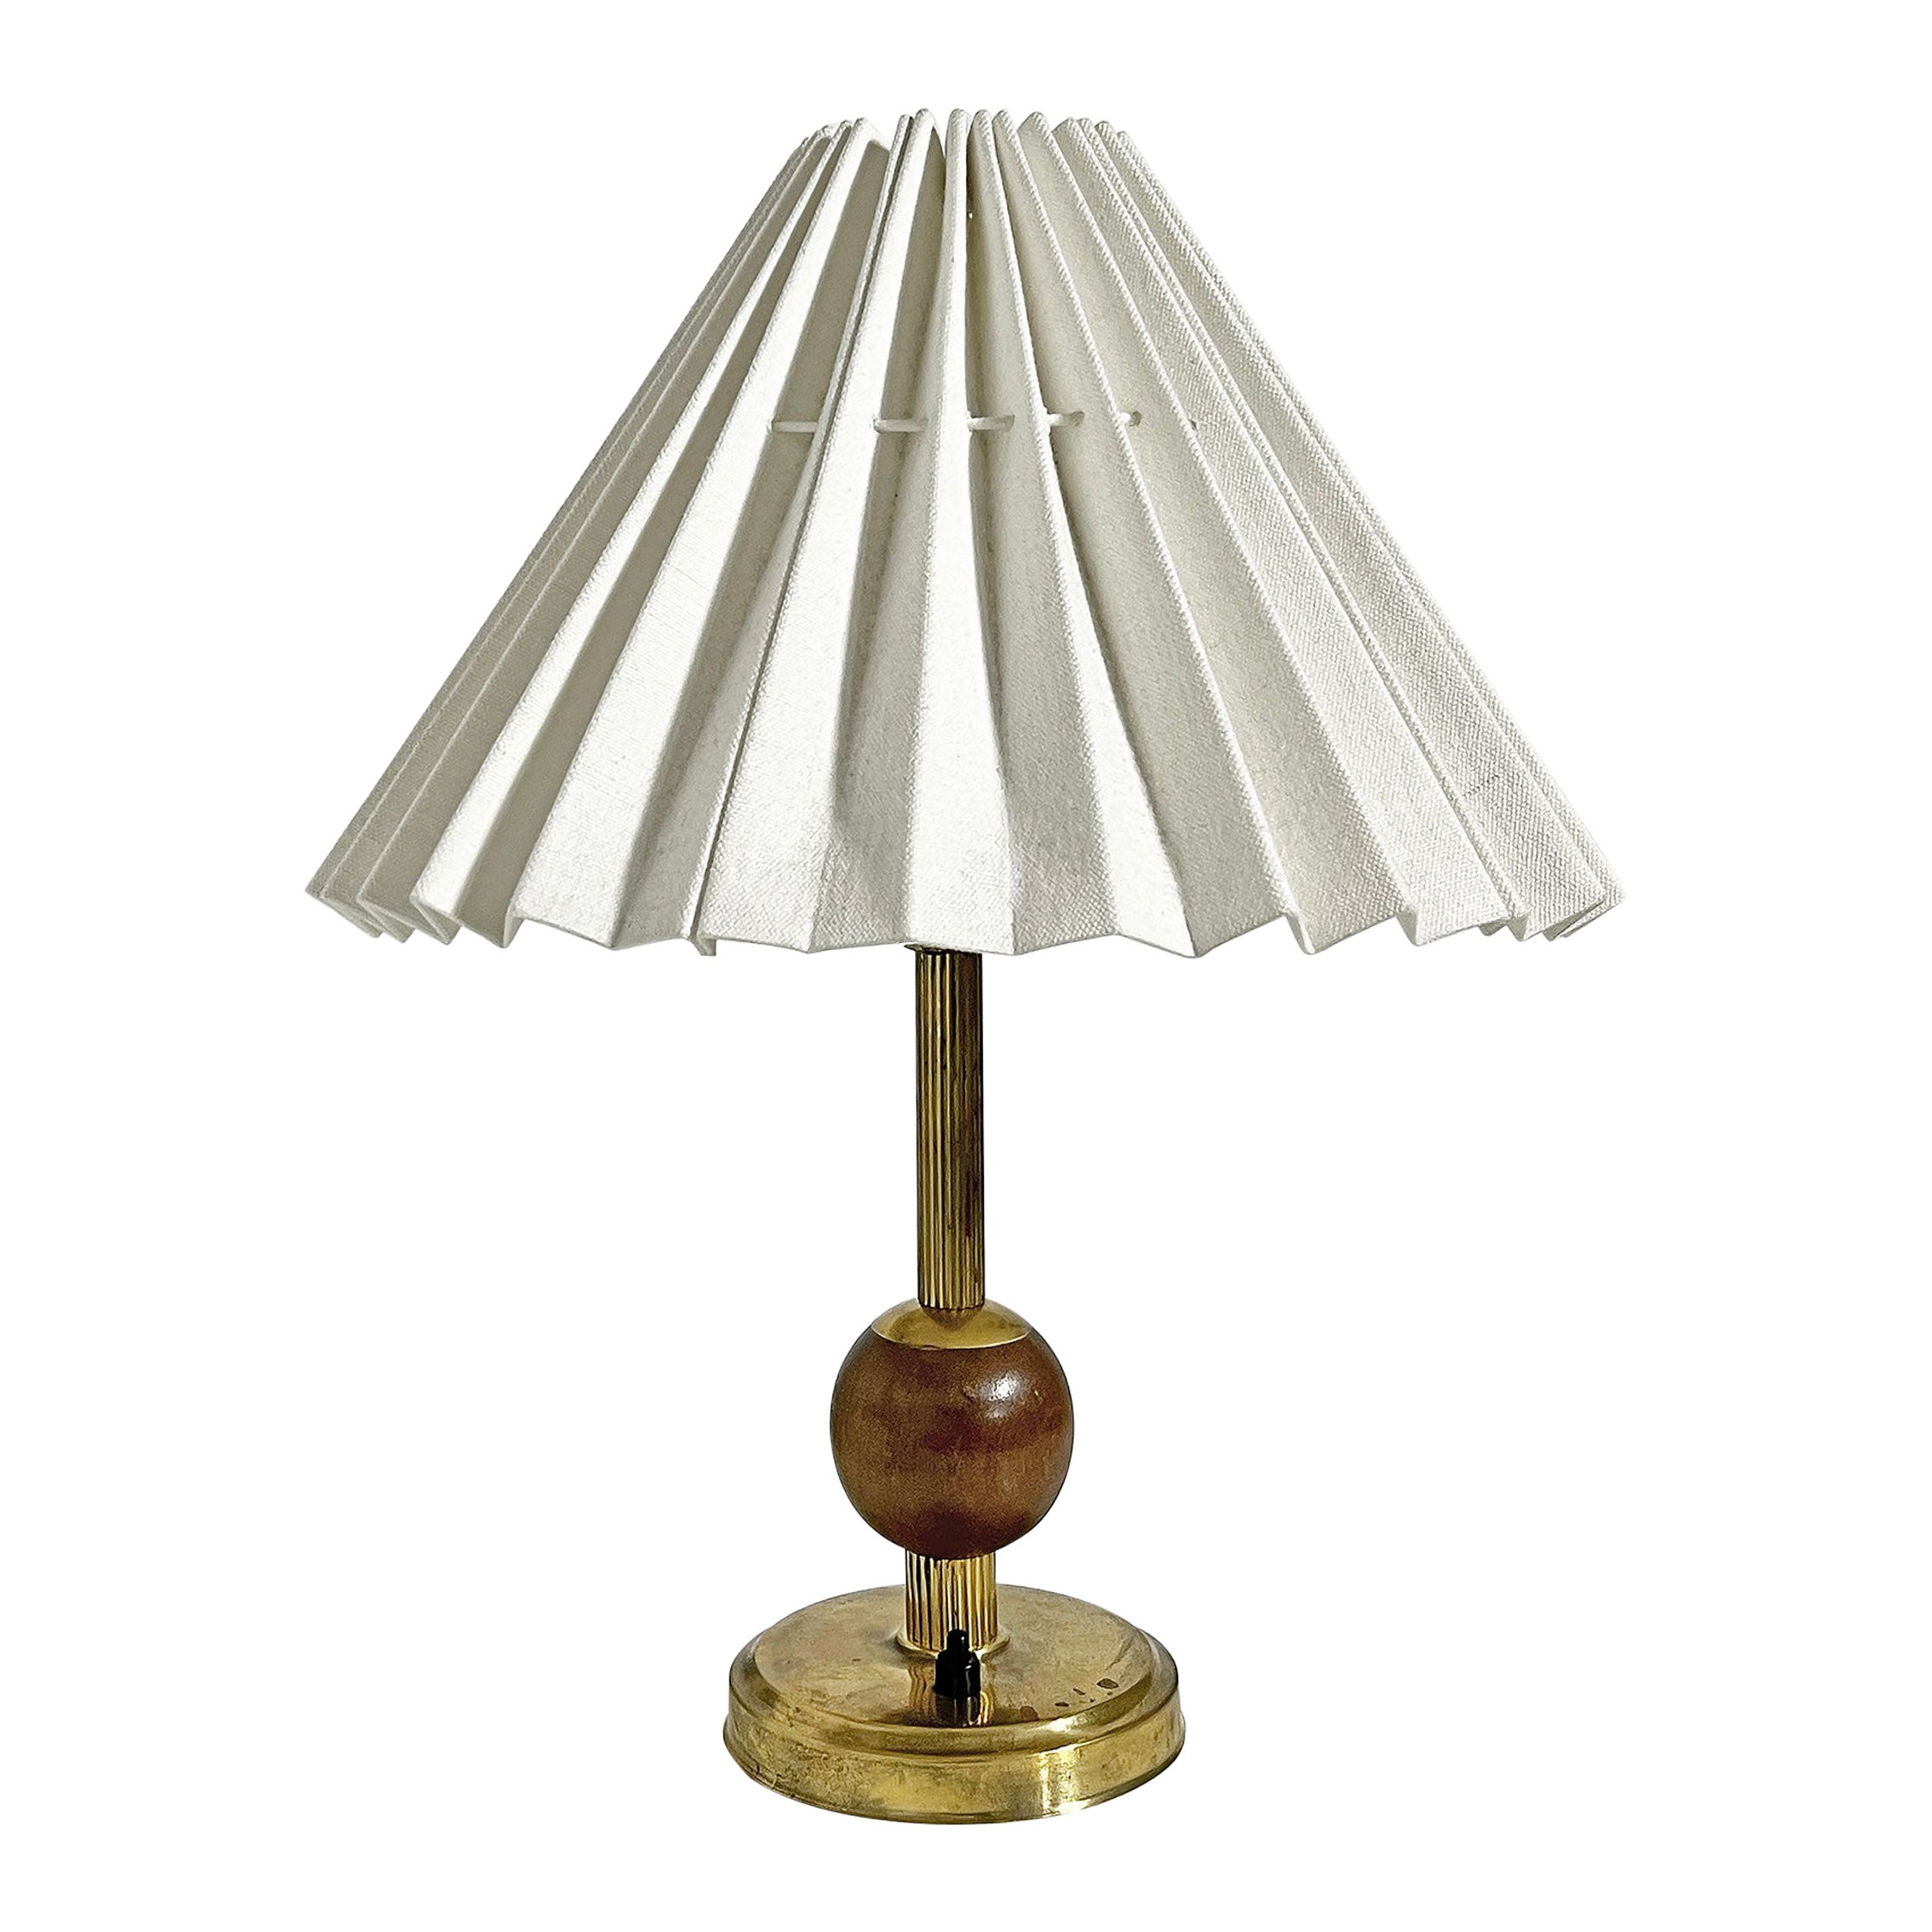 Scandinavian Modern Table Lamp In Brass and Wood ca 1960's For Sale